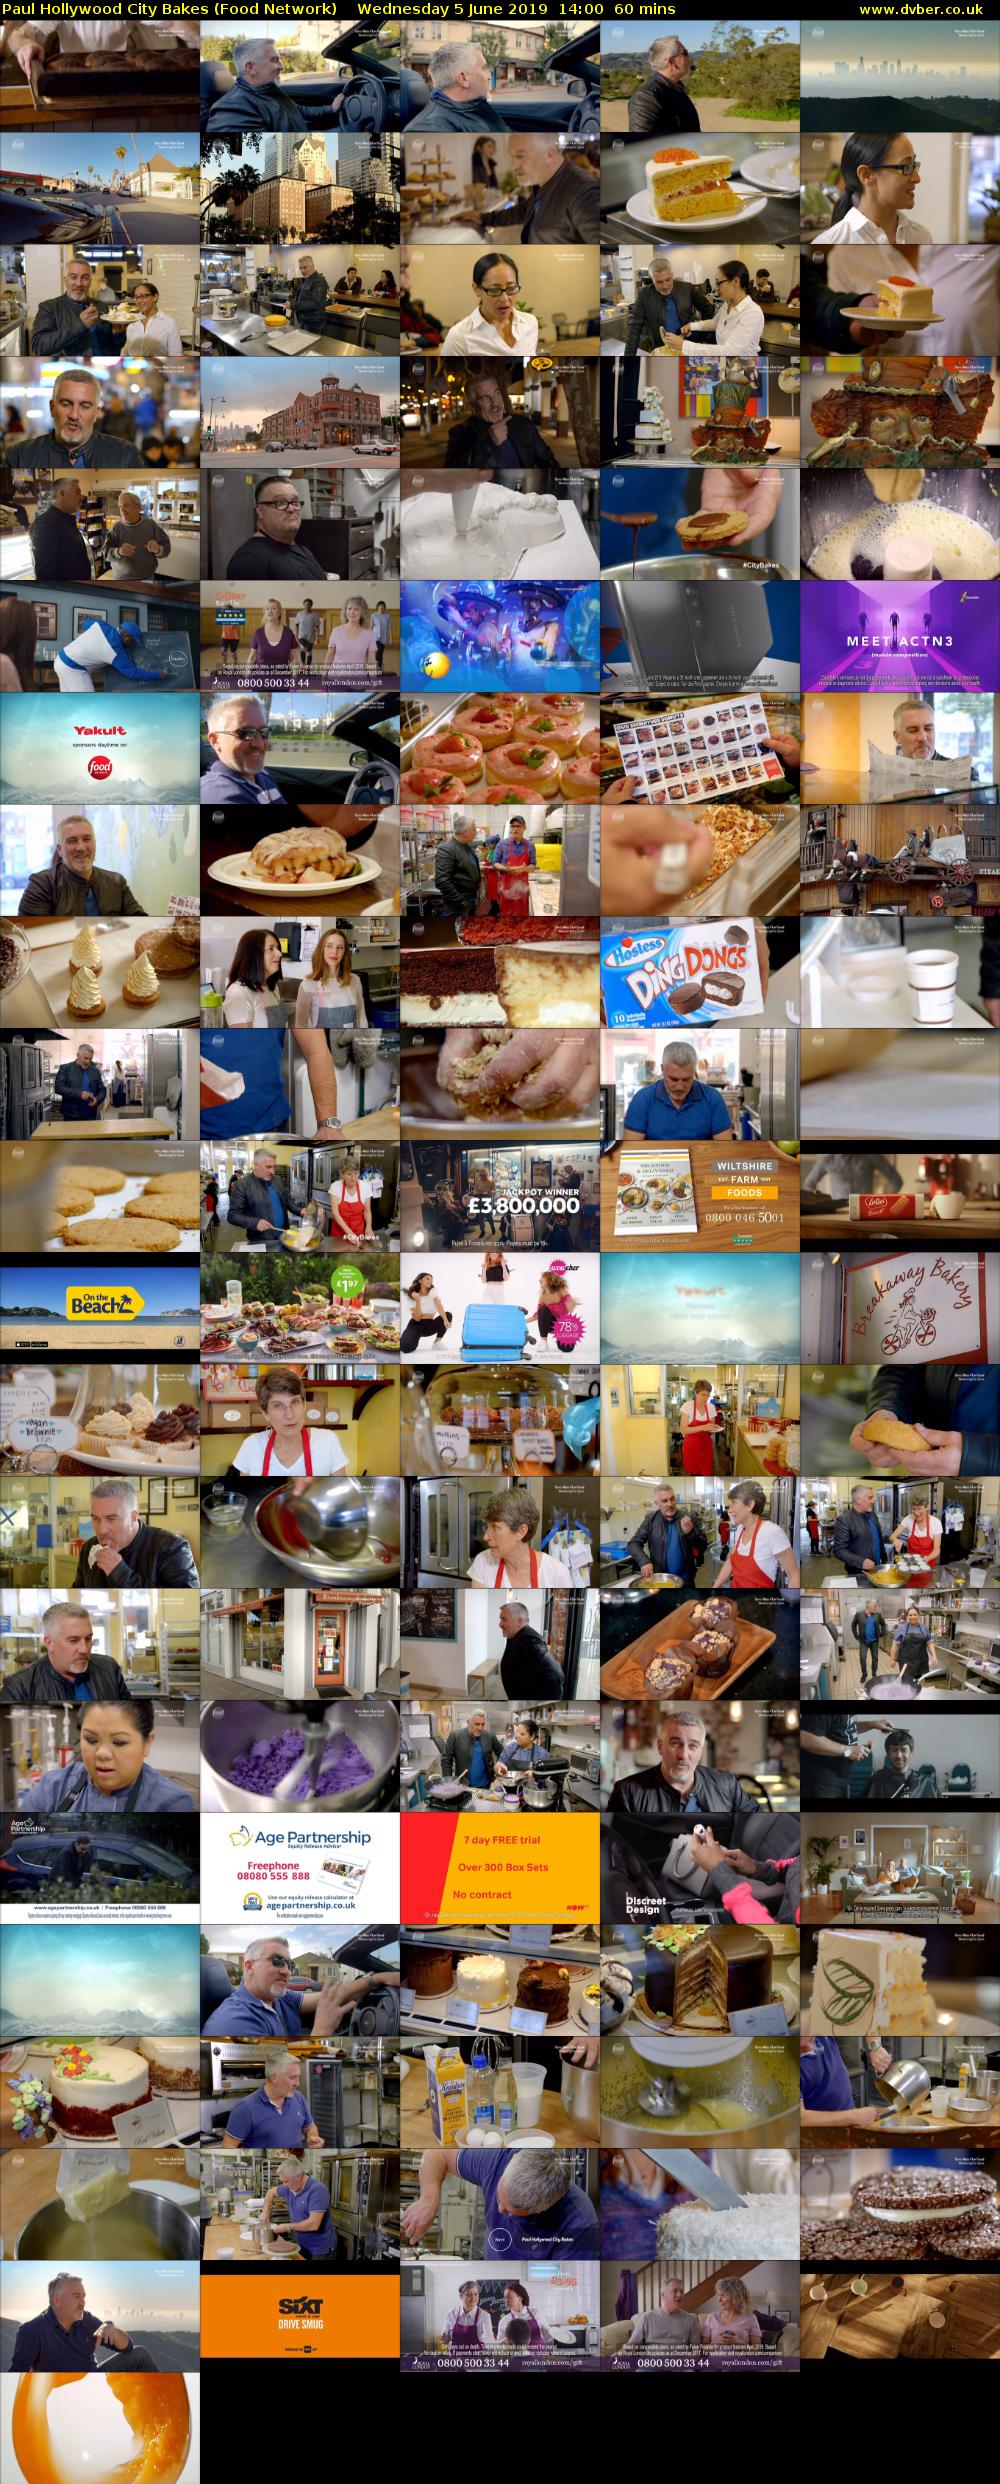 Paul Hollywood City Bakes (Food Network) Wednesday 5 June 2019 14:00 - 15:00